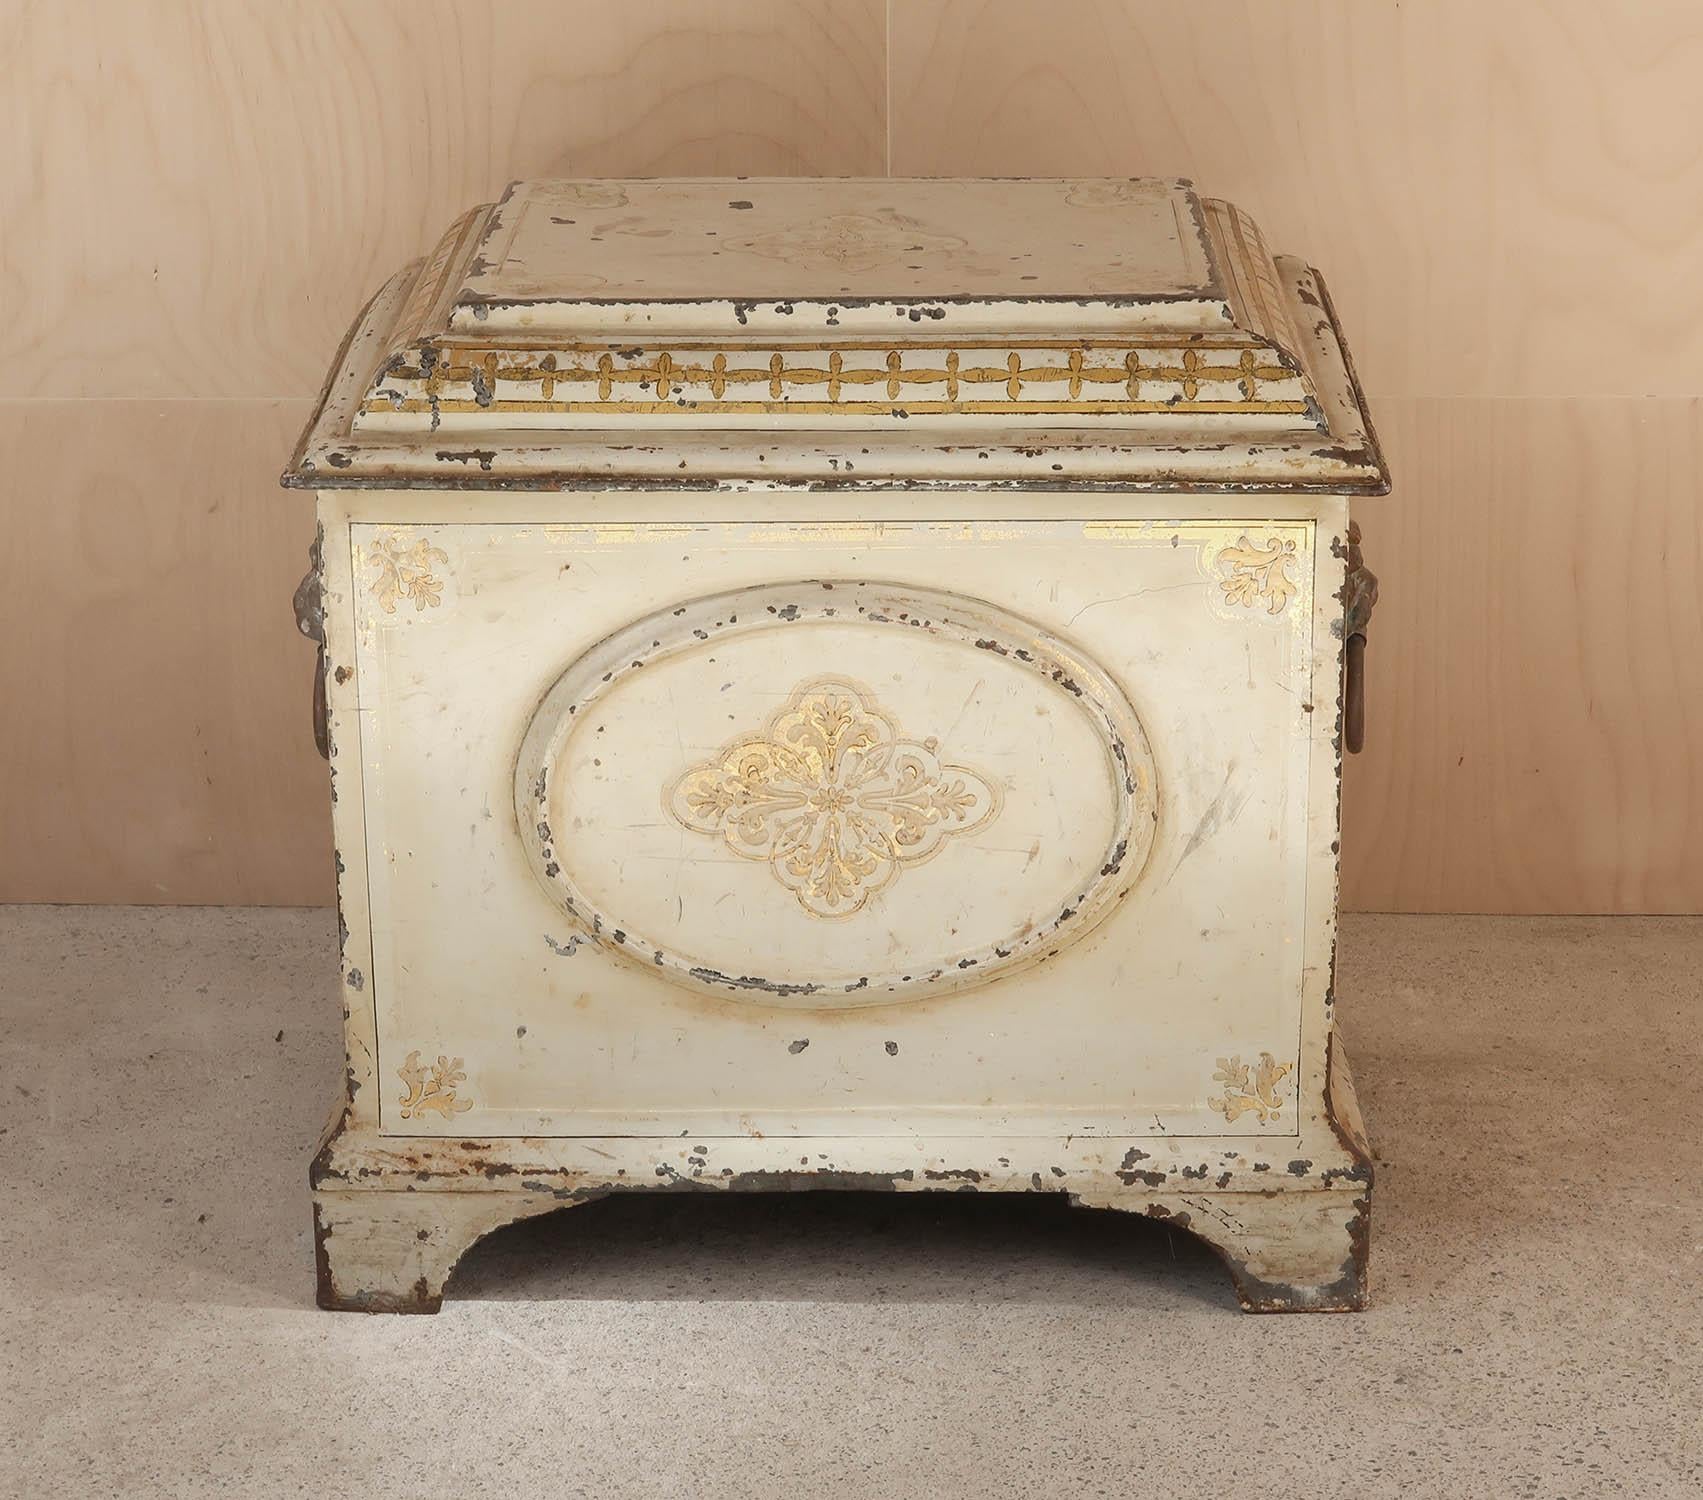 Antique Cream Painted Toleware Chest. Henry Loveridge Maker. English C.1850 For Sale 2